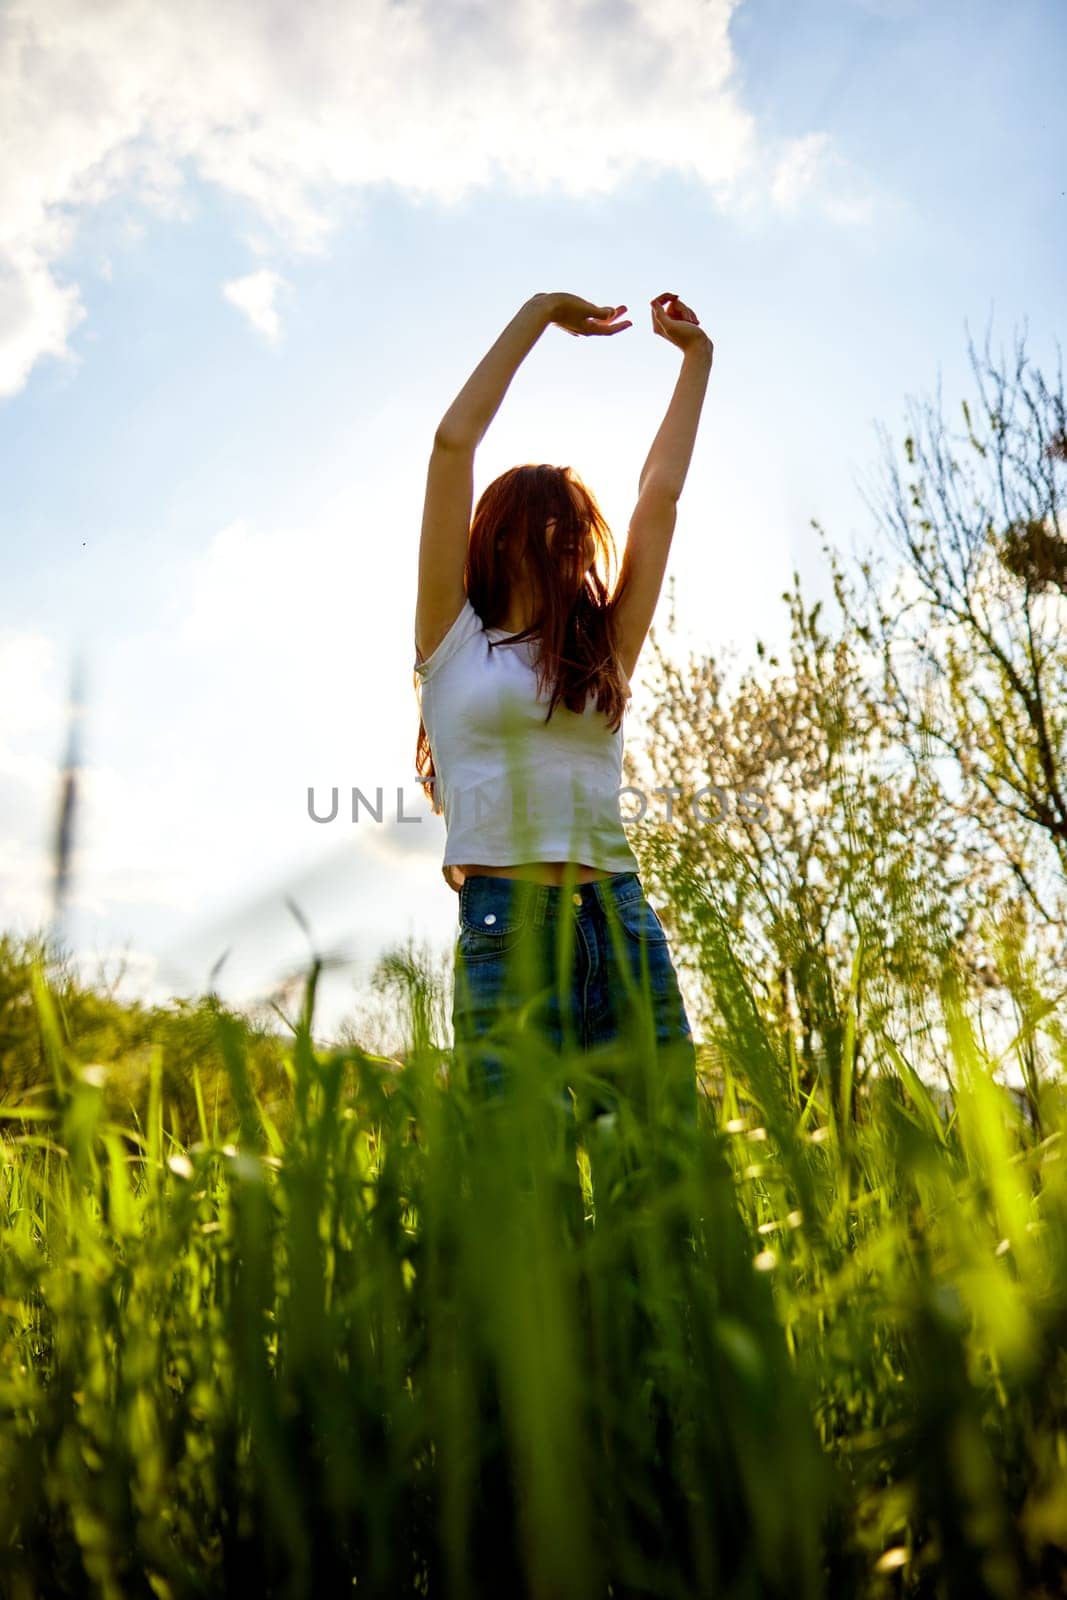 joyful slender woman posing in a field with her arms raised high by Vichizh